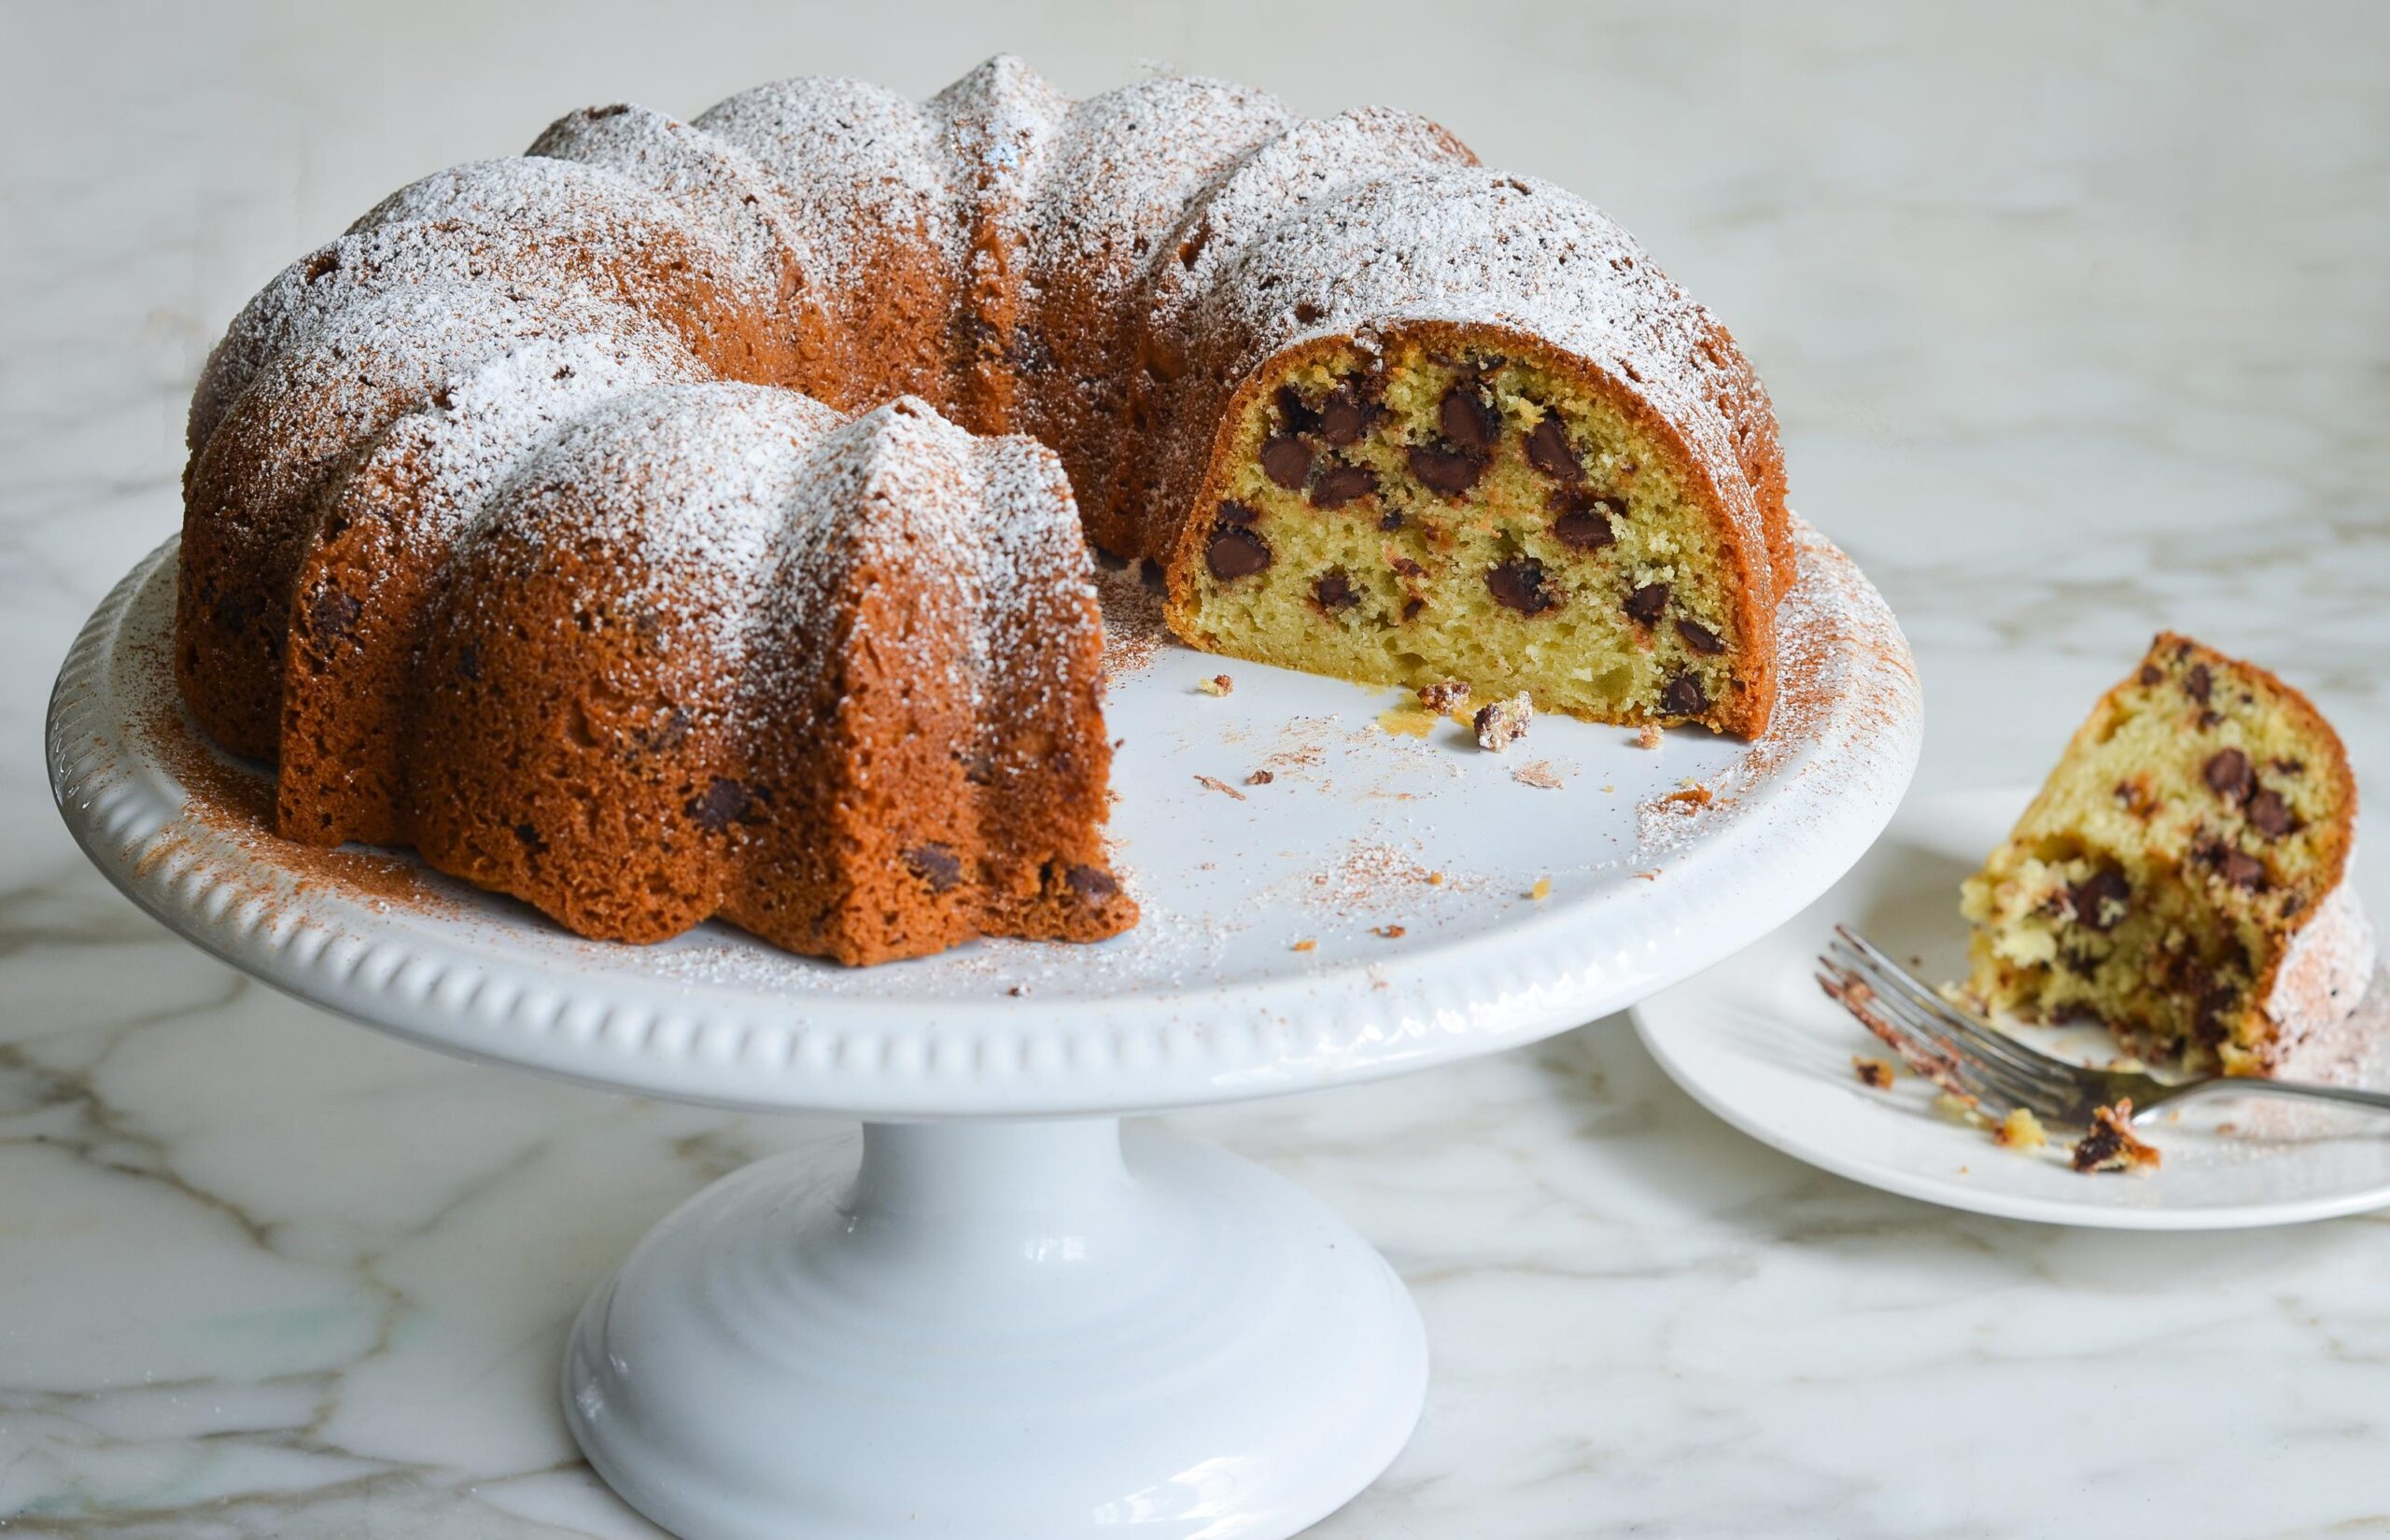  This cake is a showstopper at any brunch.